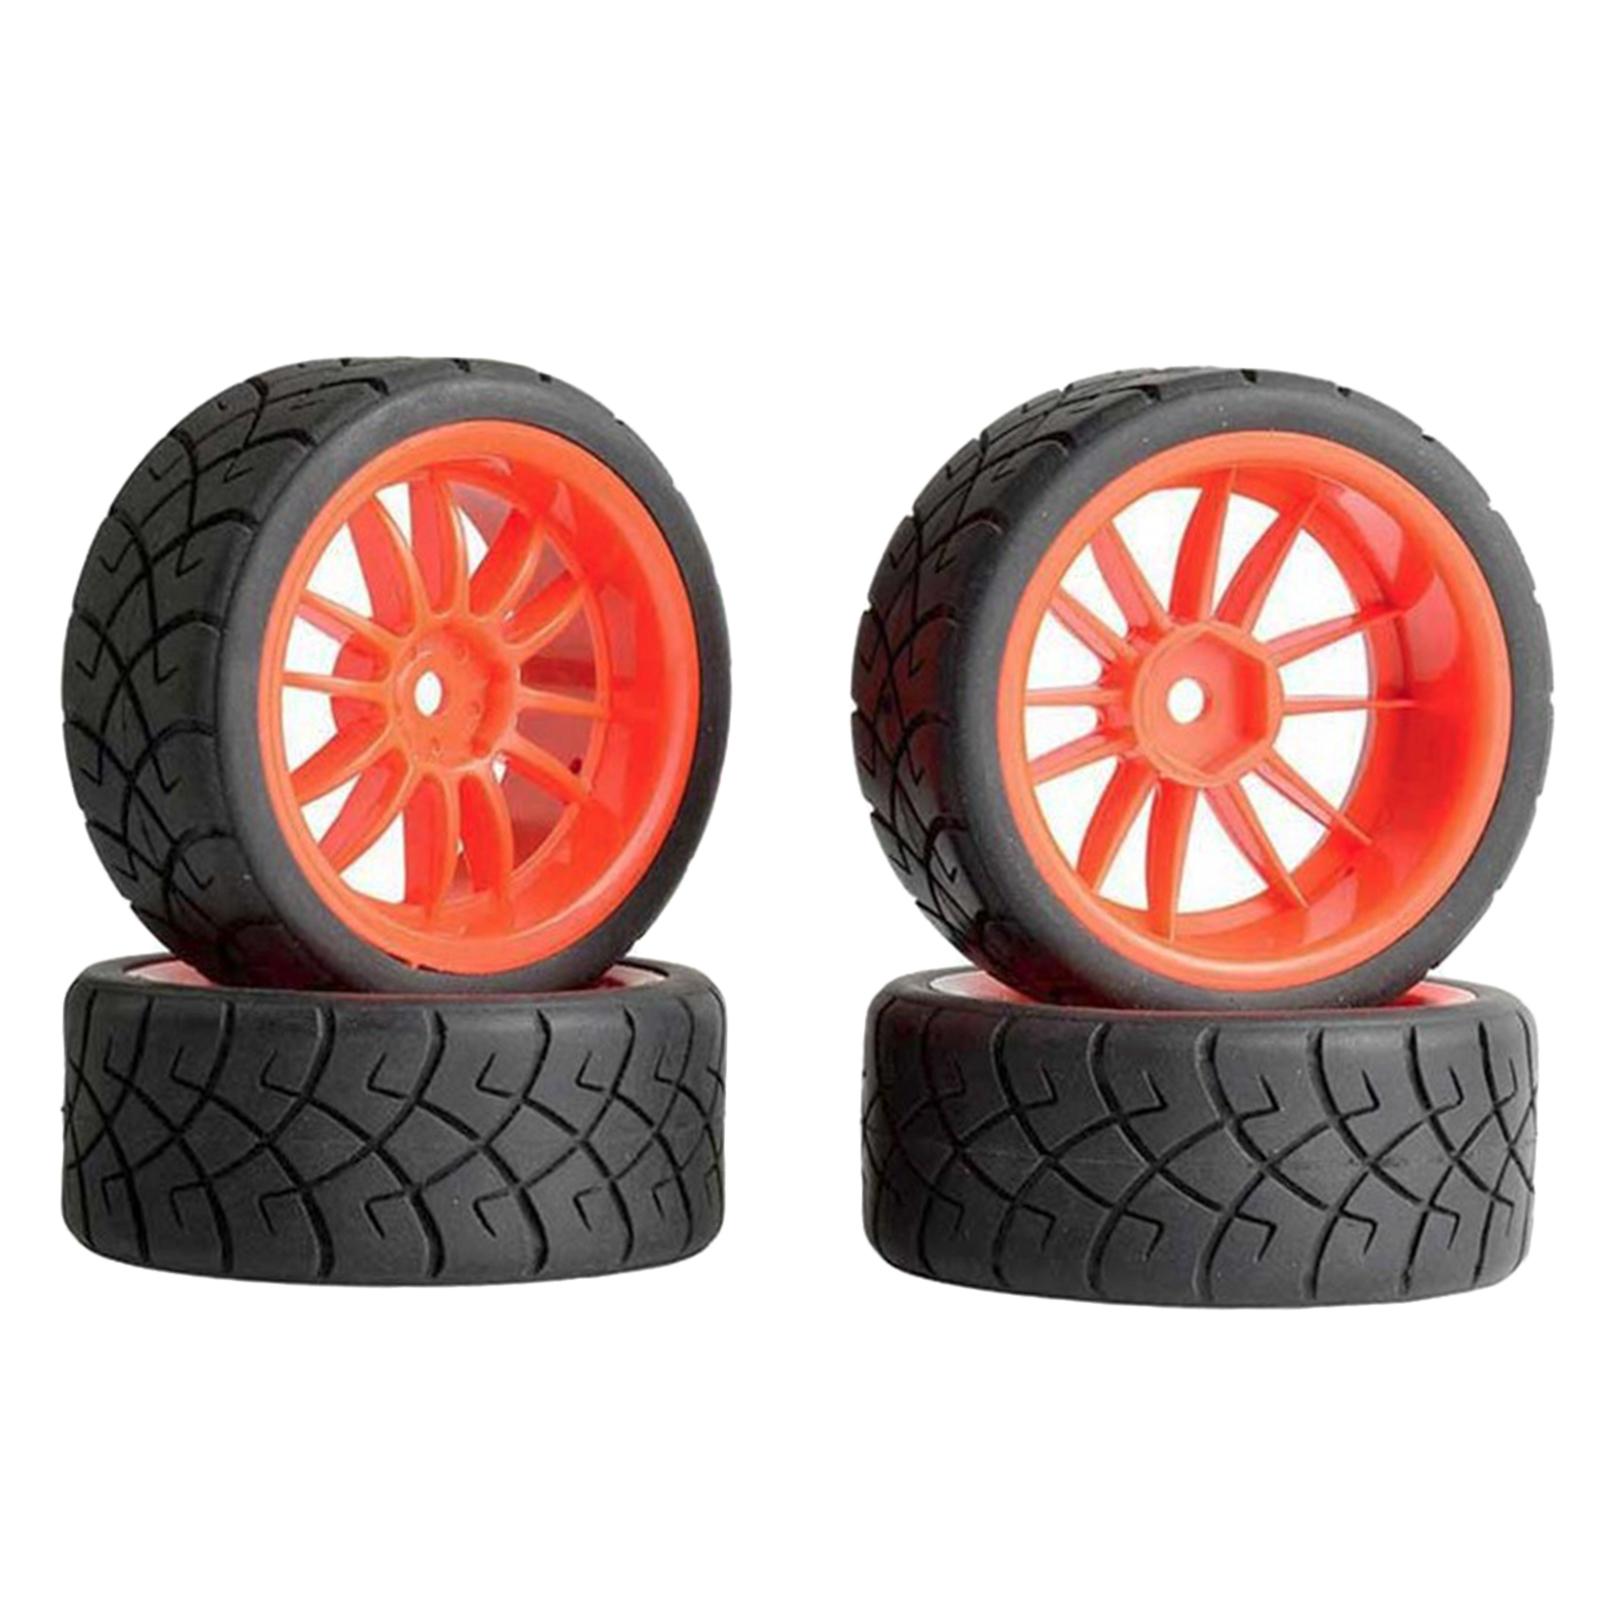 4pcs 1:10 Rubber Tire Remote Control Truck for 144001 124018 124019 for Remo 1631 Spare Parts , Red - image 1 of 7